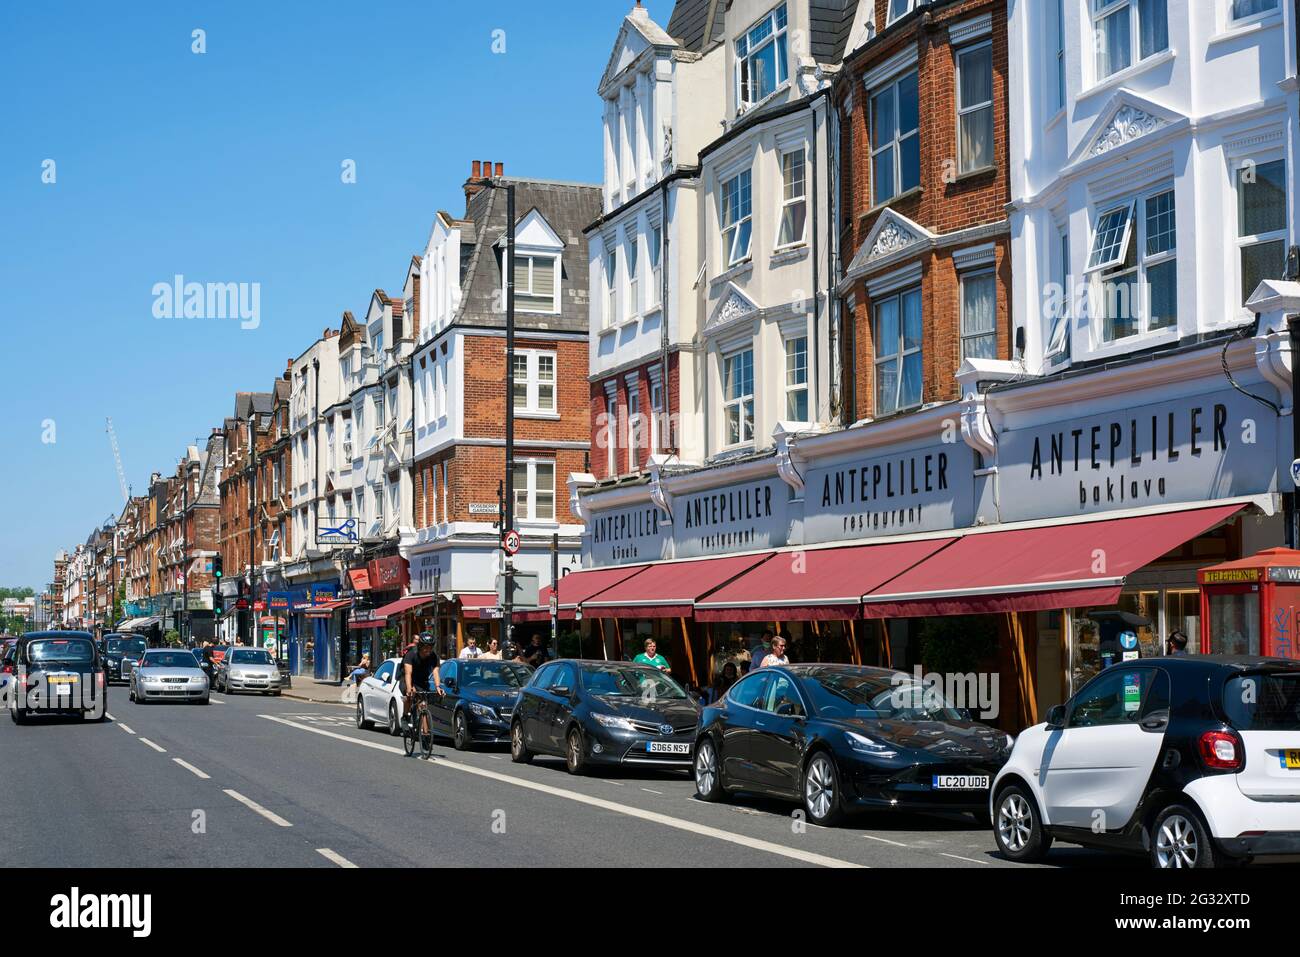 Restaurants, shops and buildings along Green Lanes, Harringay, North London UK, in summertime Stock Photo